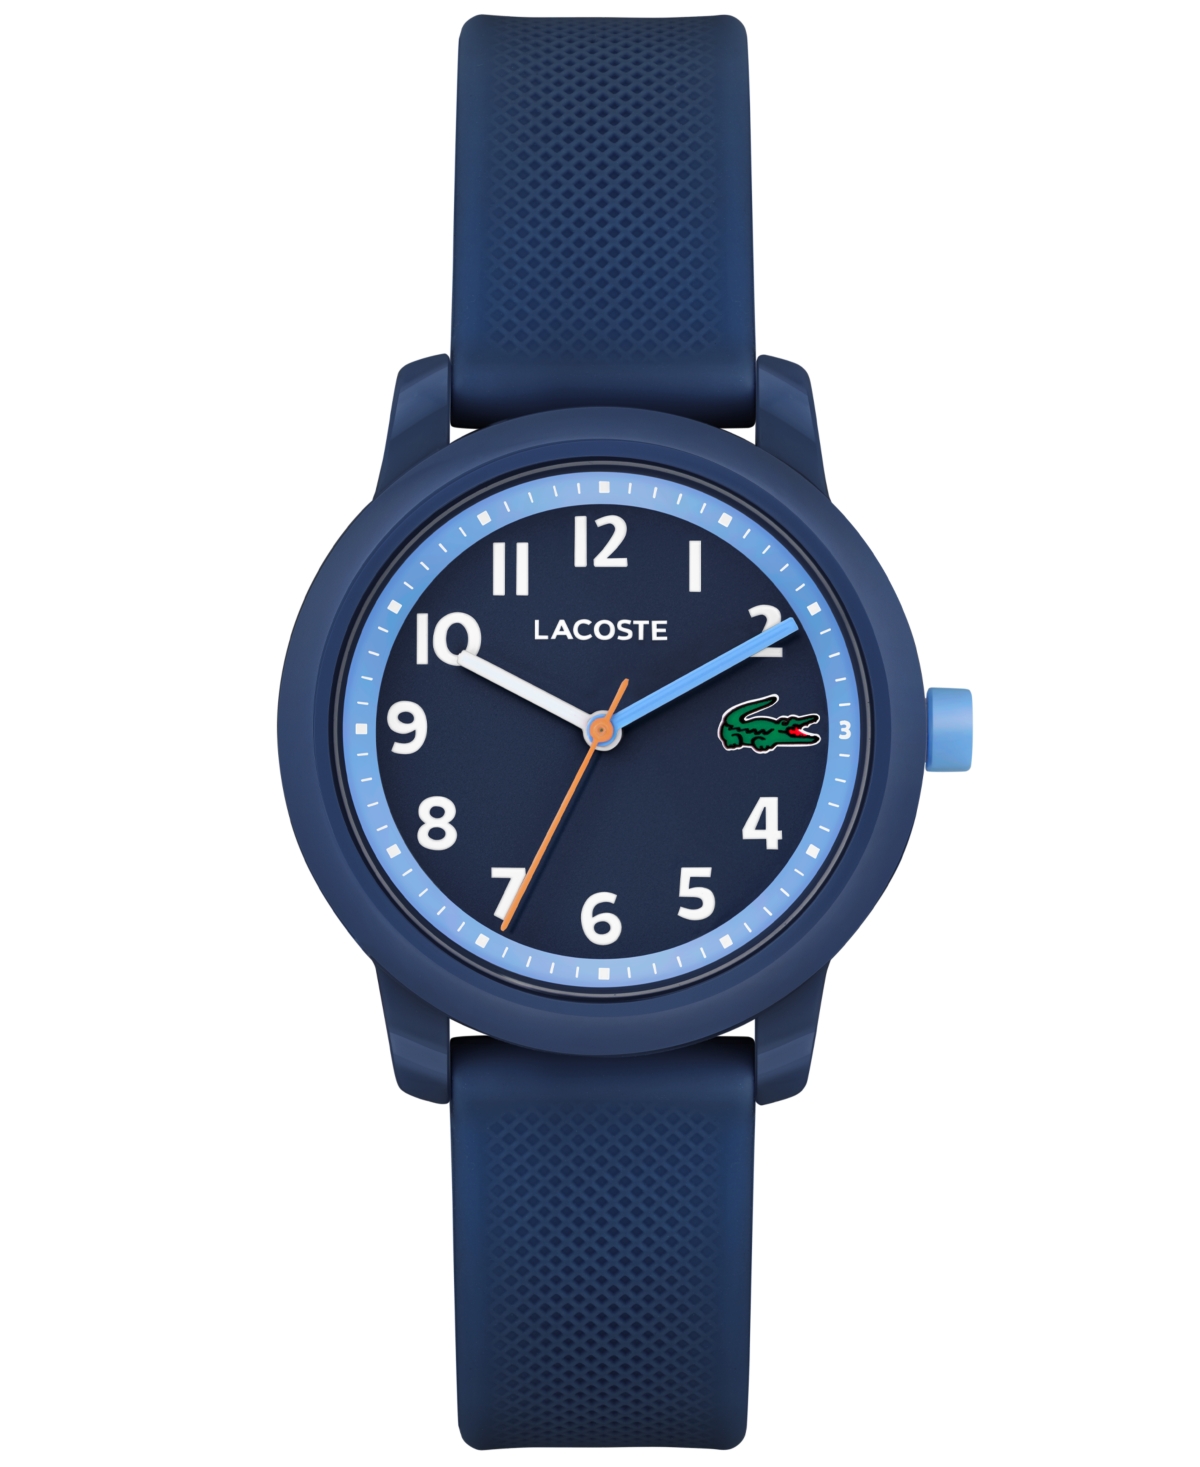 LACOSTE KIDS L.12.12 LIGHT NAVY SILICONE STRAP WATCH 32MM WOMEN'S SHOES